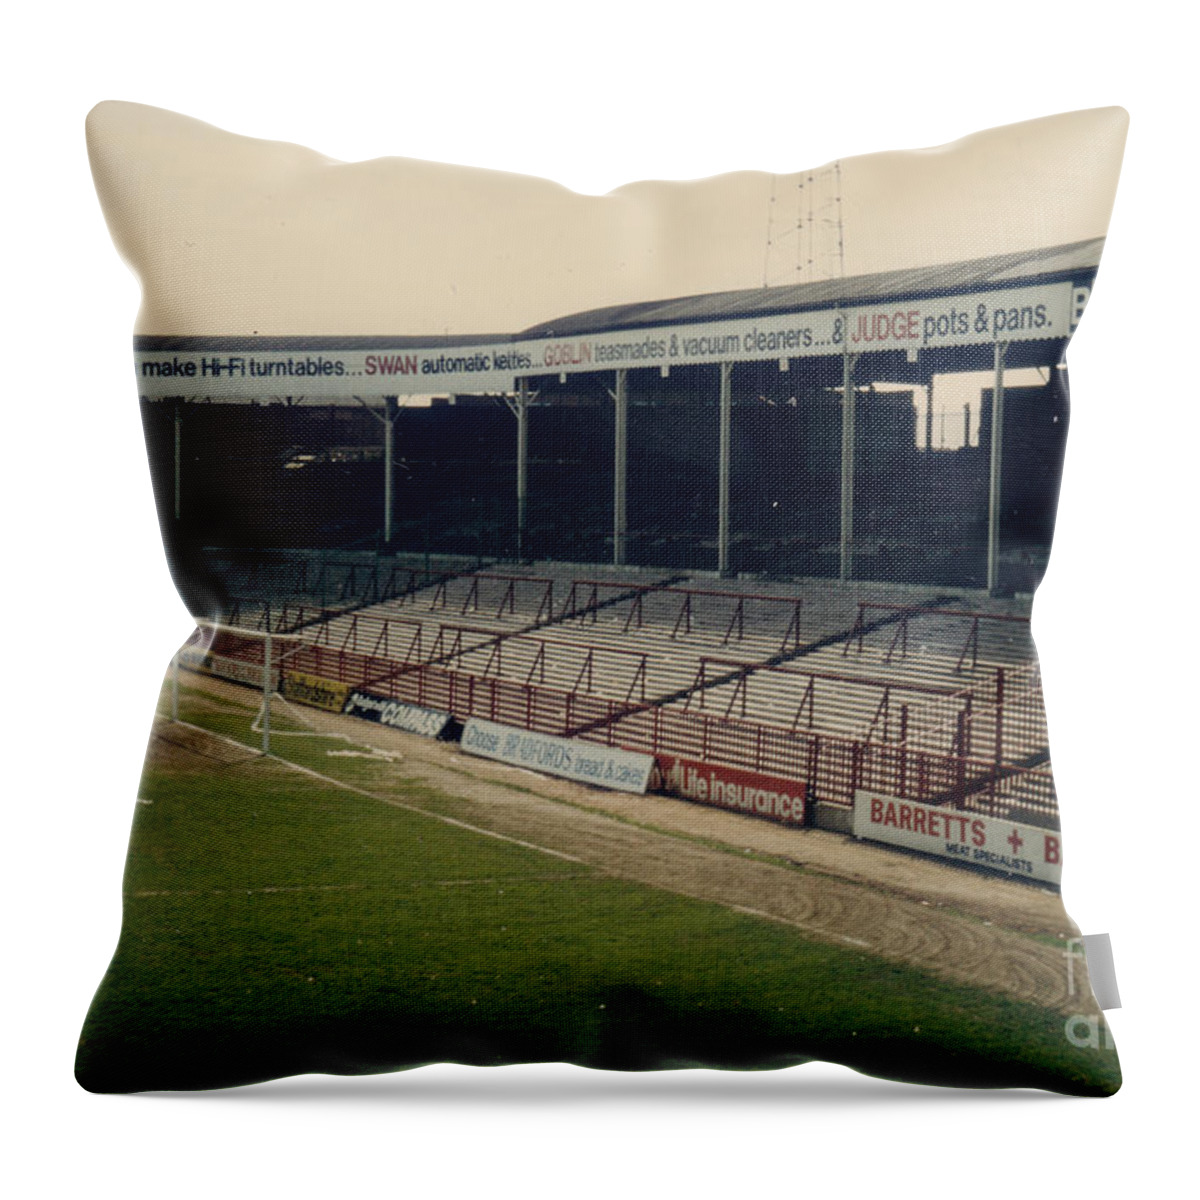  Throw Pillow featuring the photograph West Bromwich Albion - The Hawthorns - Smethwick End 1 - 1970s by Legendary Football Grounds